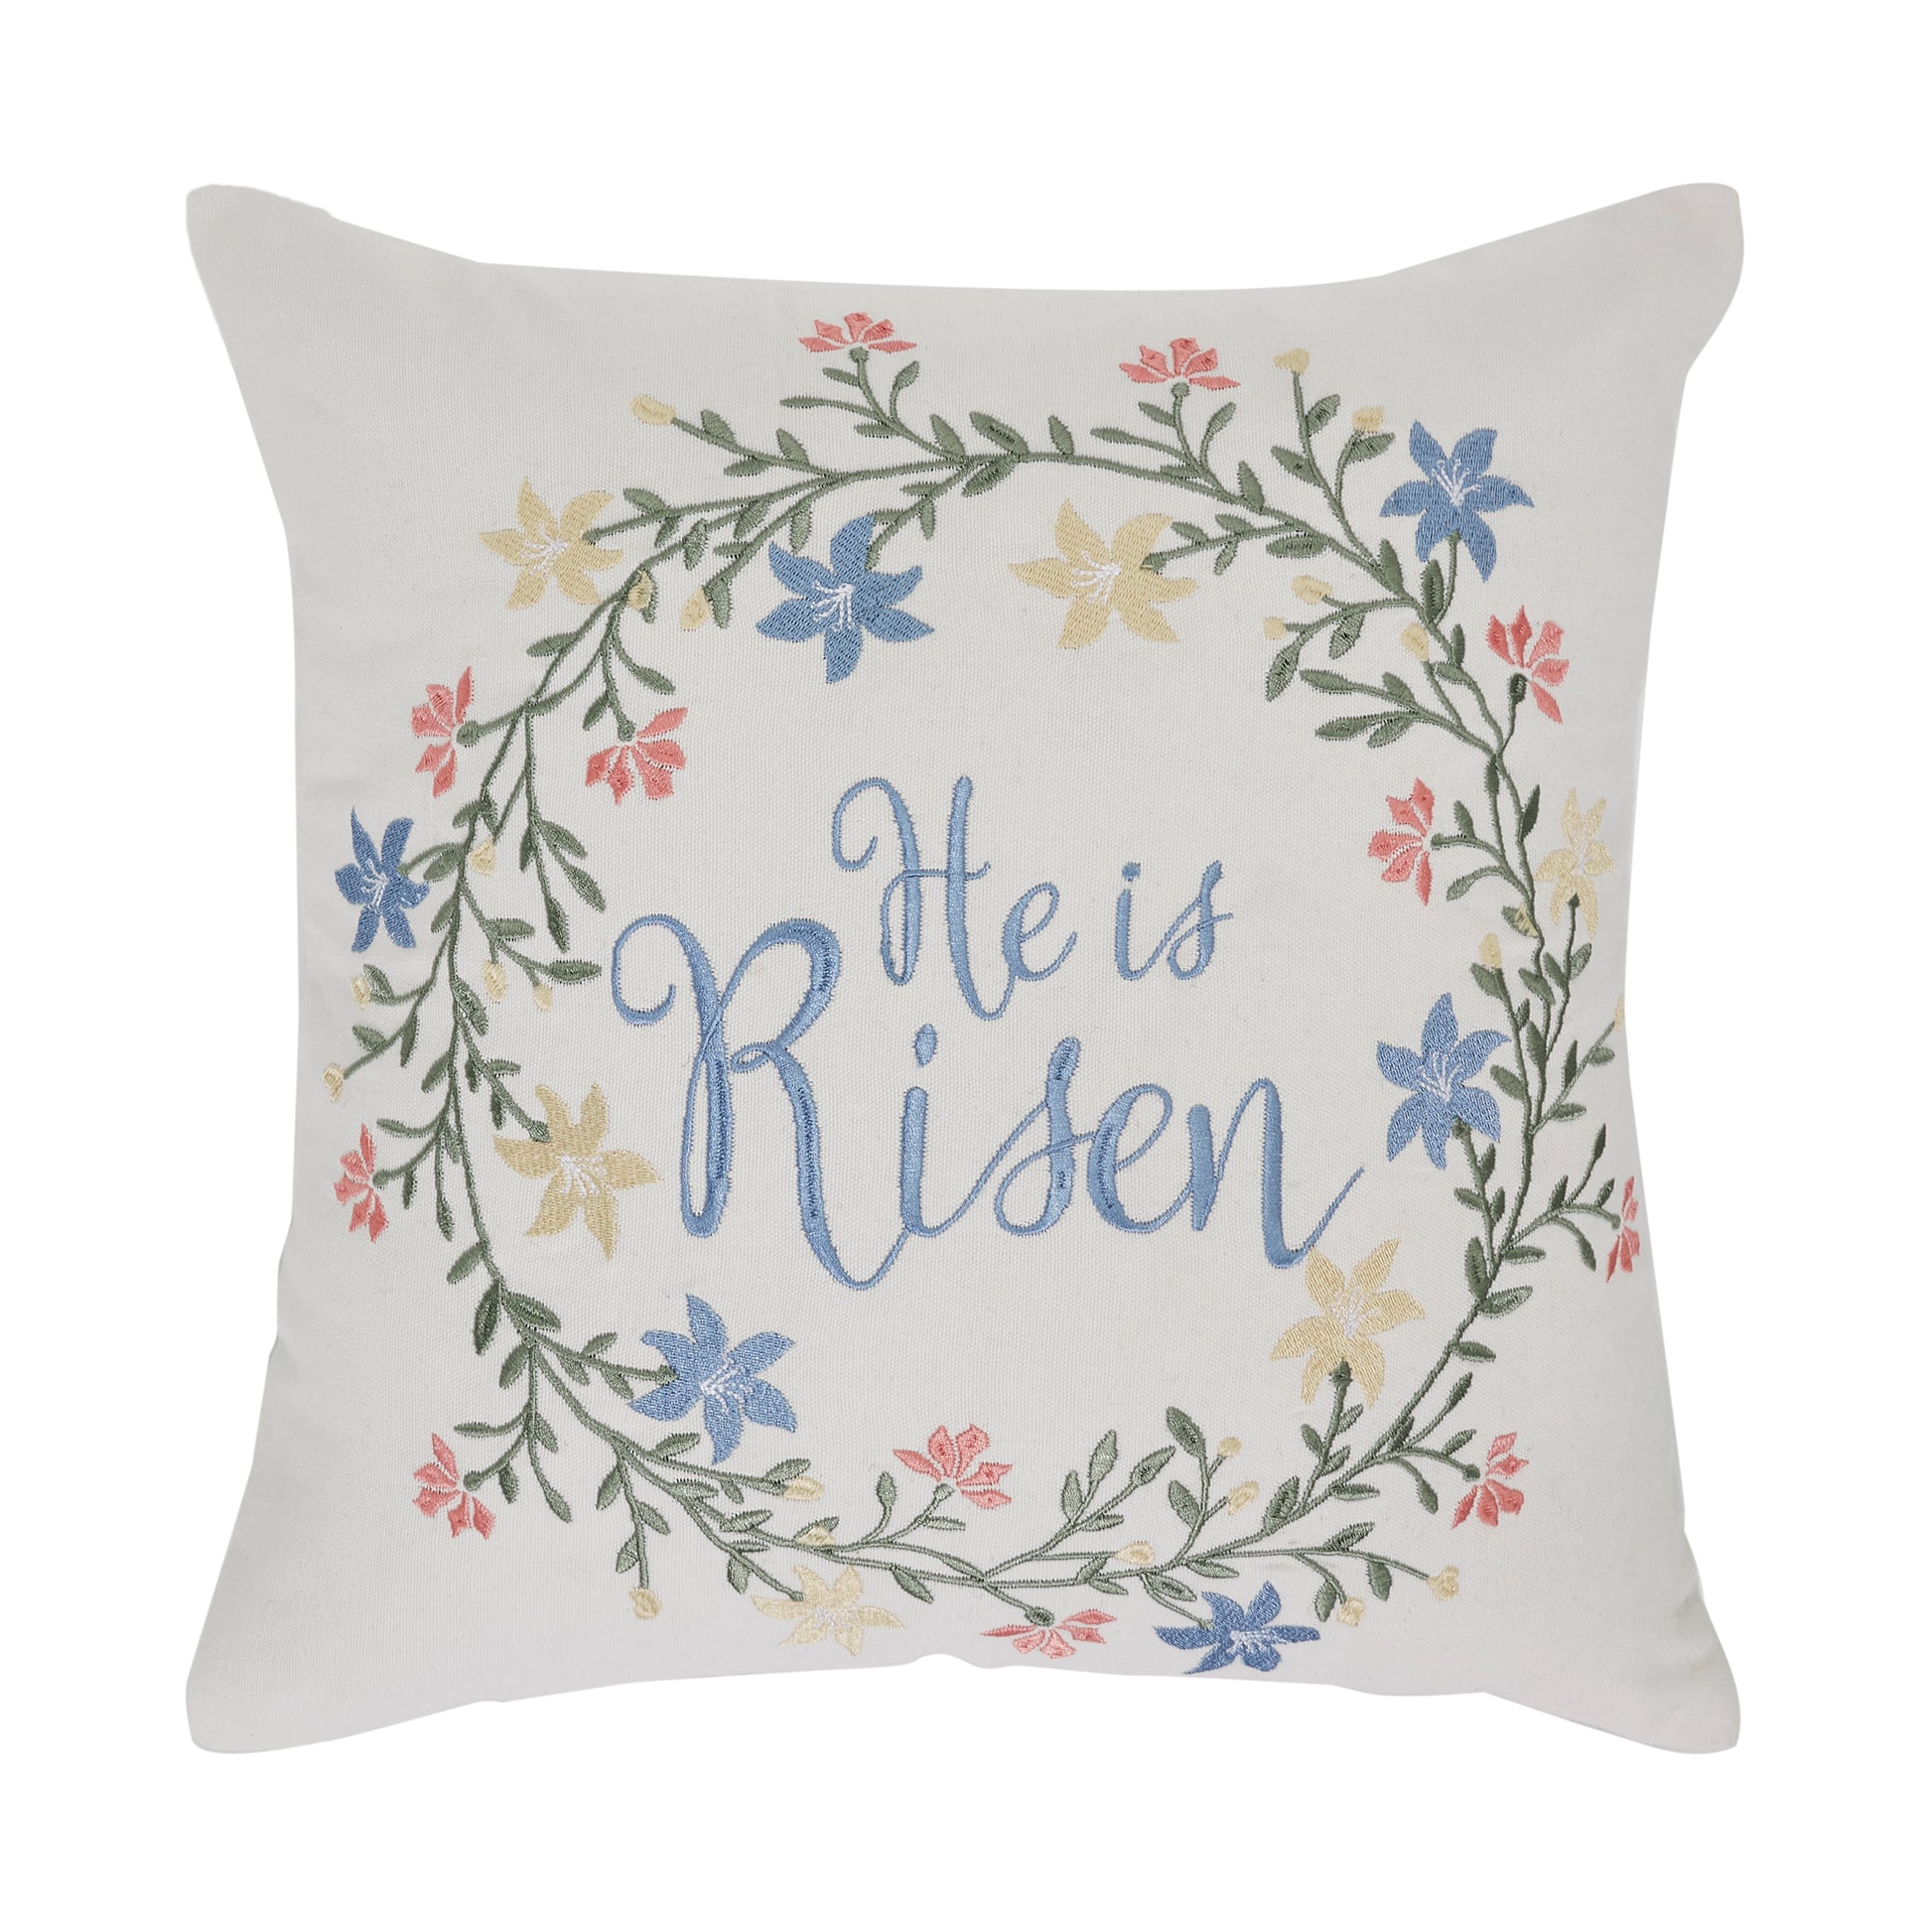 81150-He-is-Risen-Pillow-18x18-image-2